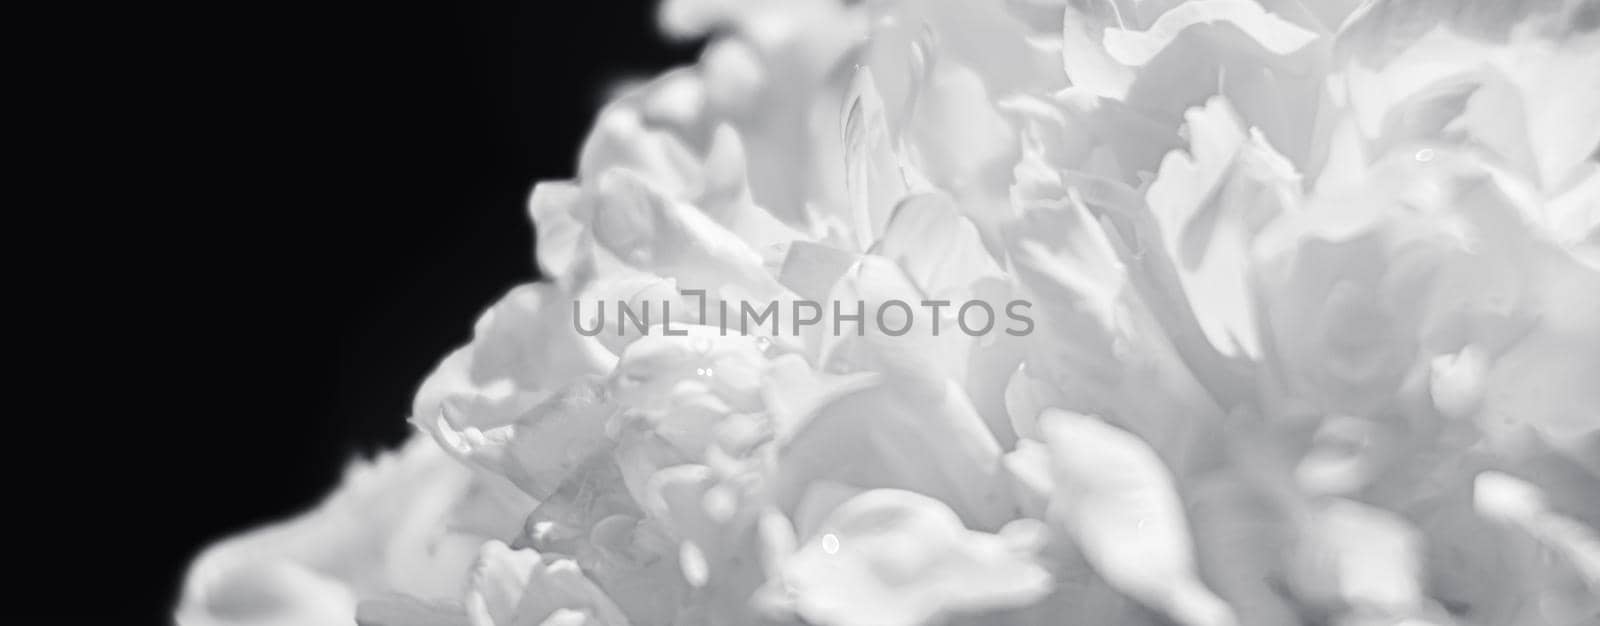 Abstract nature background. Soft focus image of blooming peonies